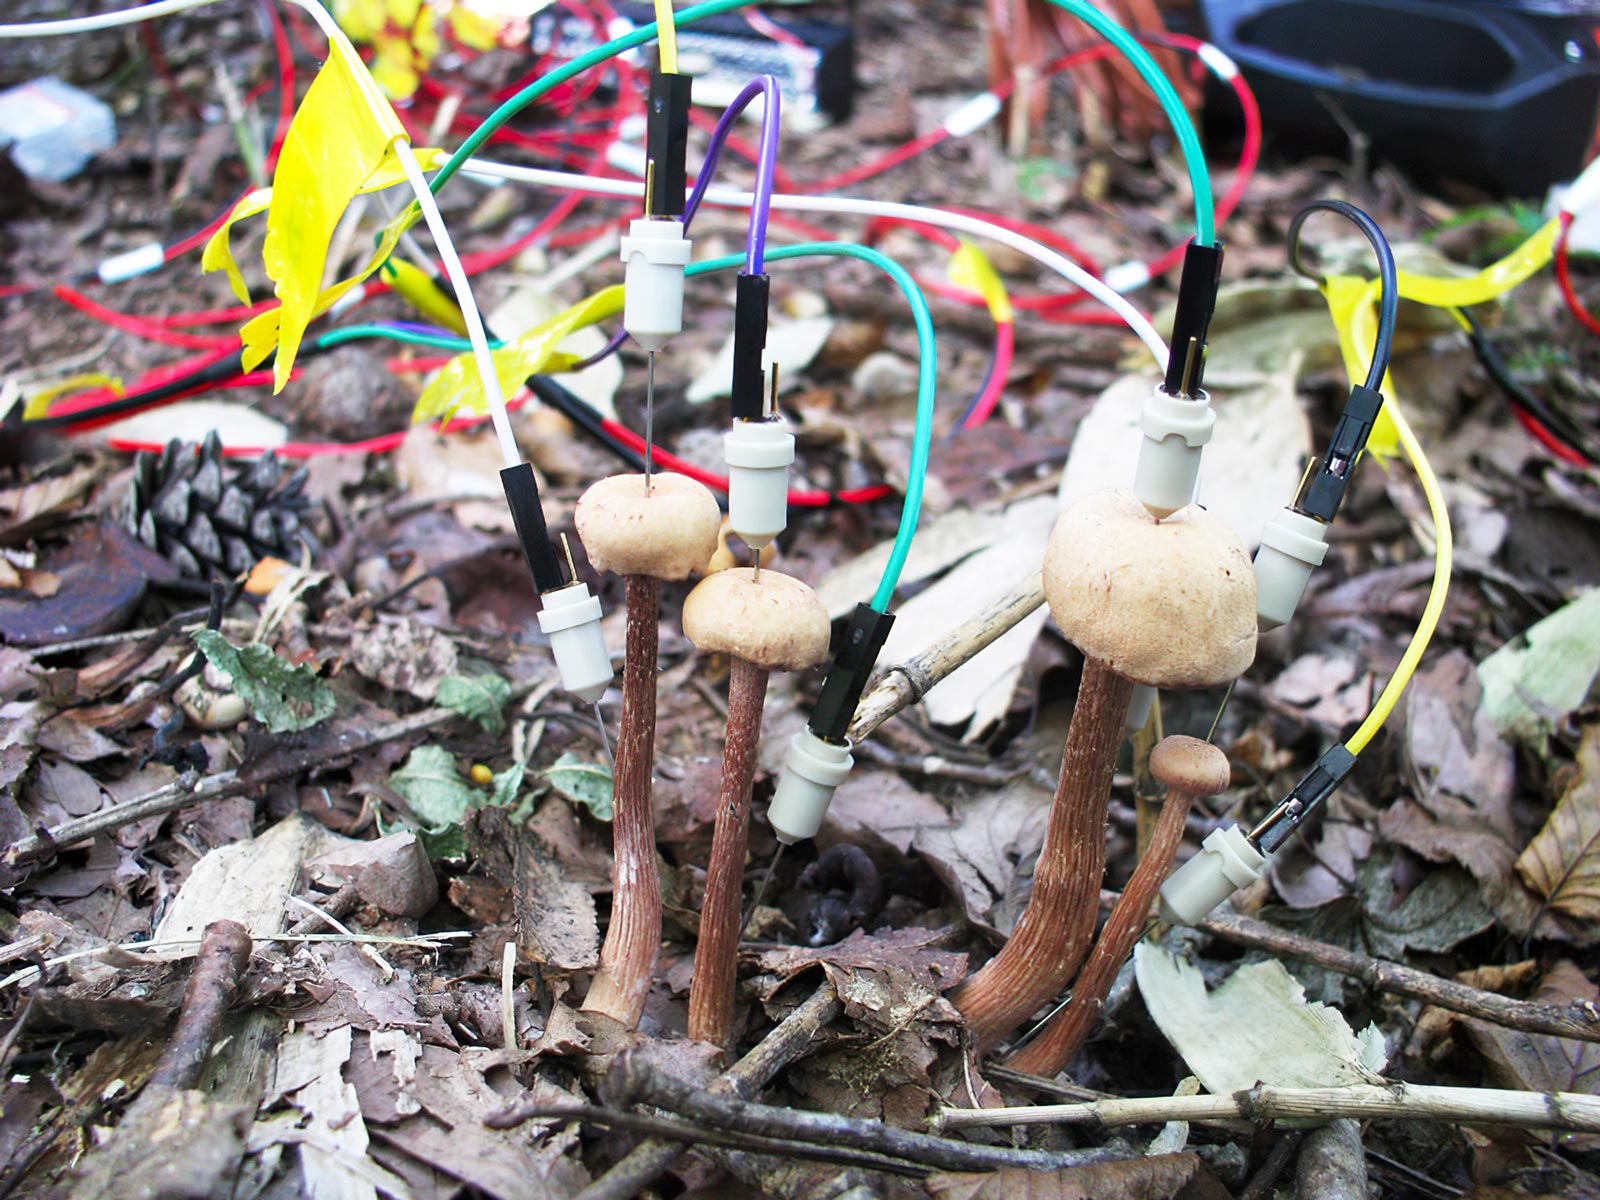 Mushrooms With Electrodes Attached